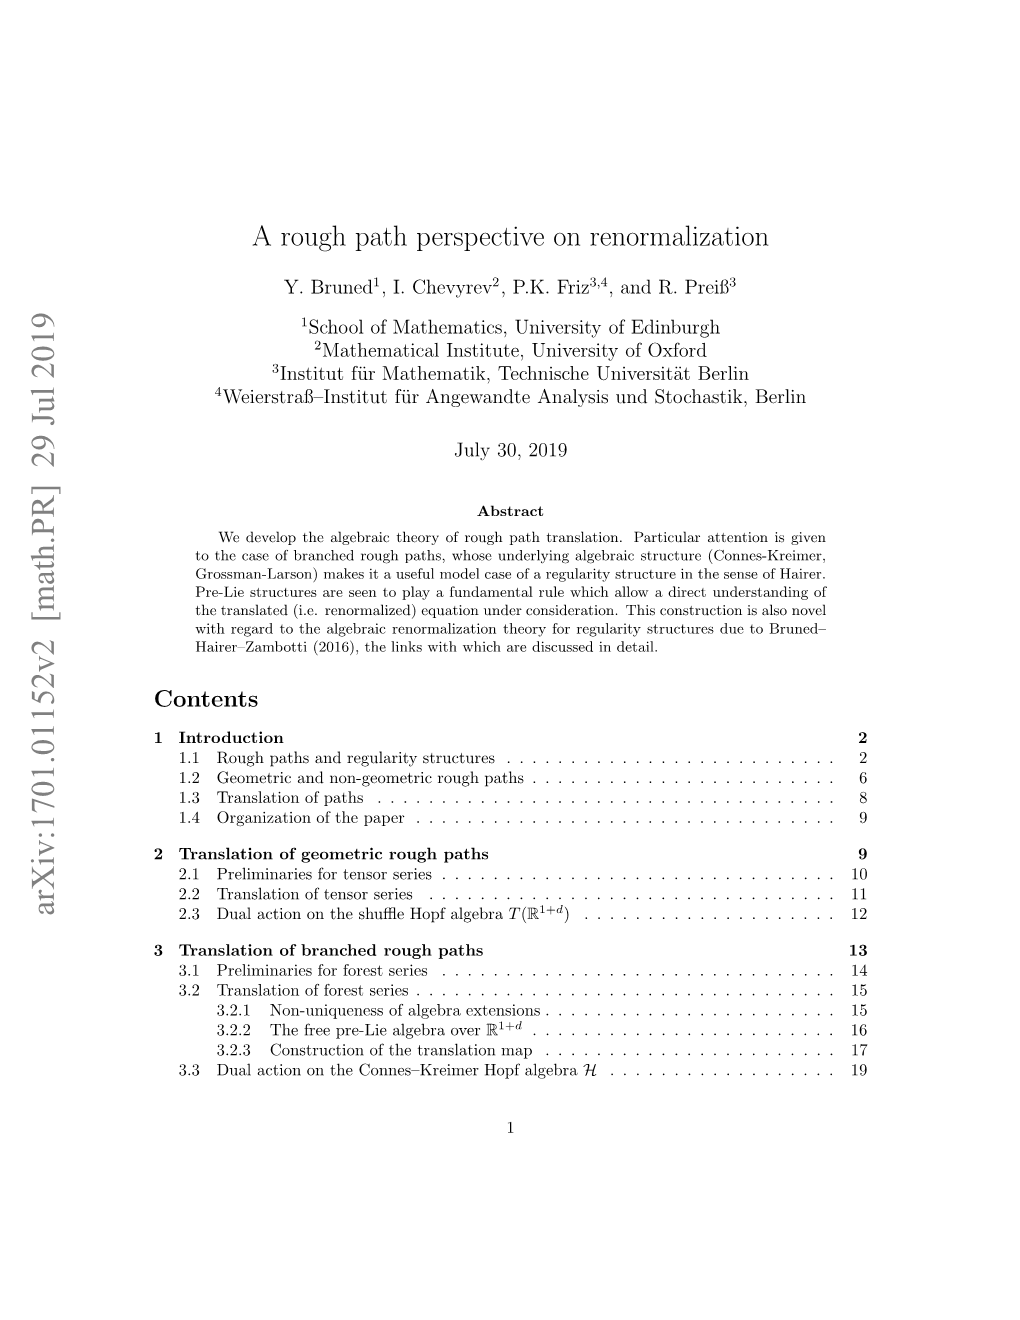 A Rough Path Perspective on Renormalization